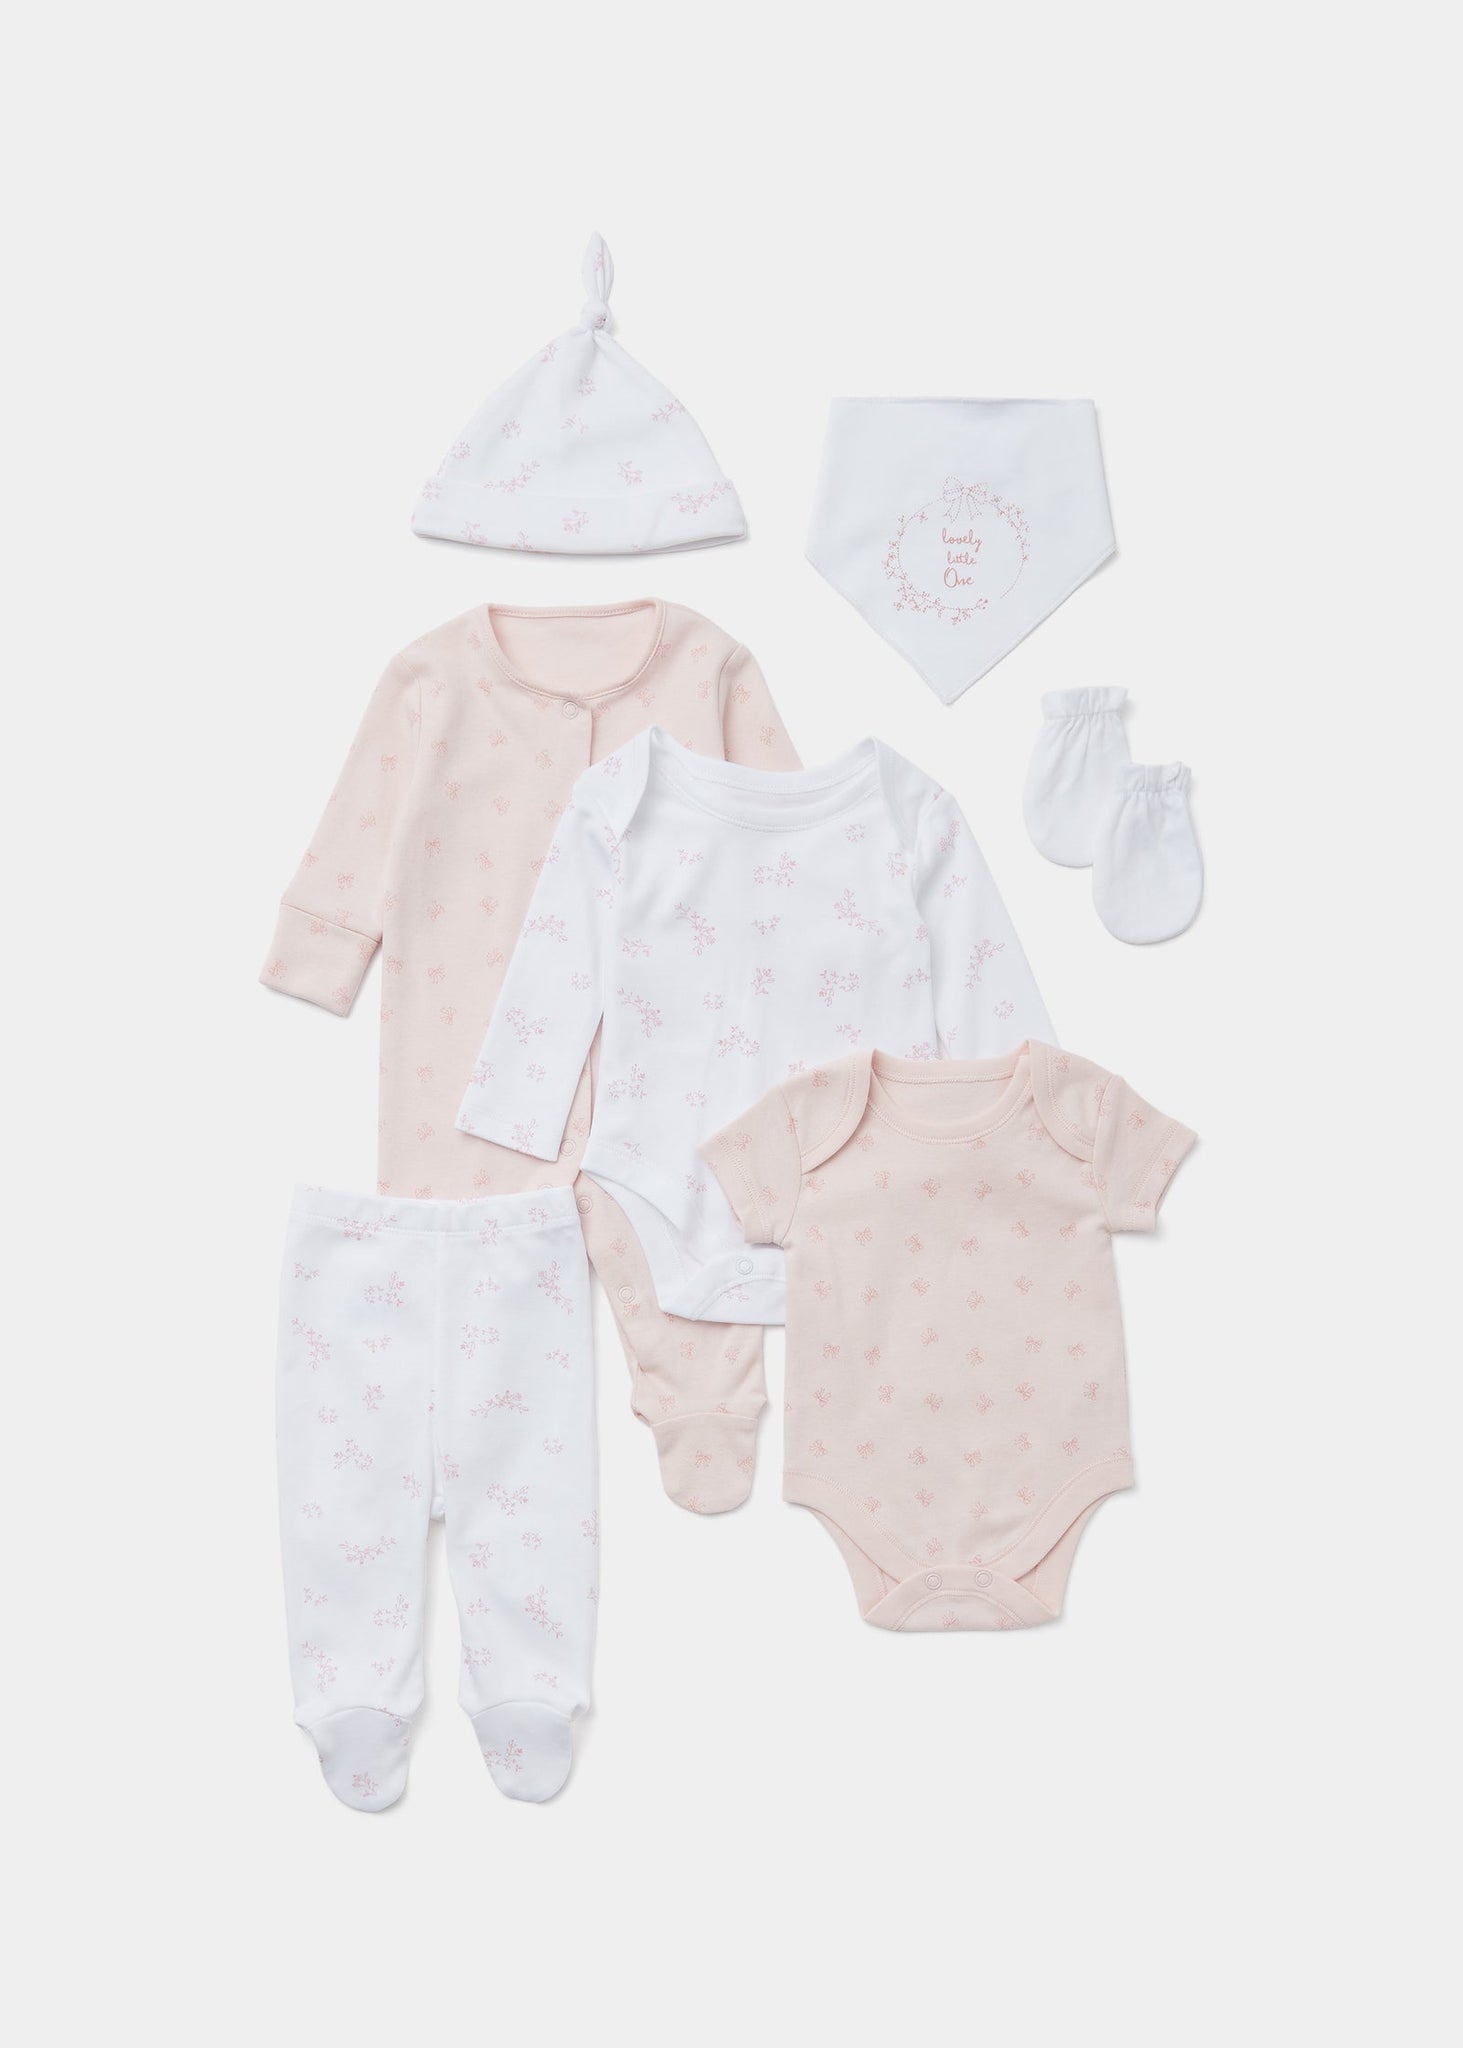 Baby 7 Piece Pink Layette Set (Tiny Baby-6mths)  C136027